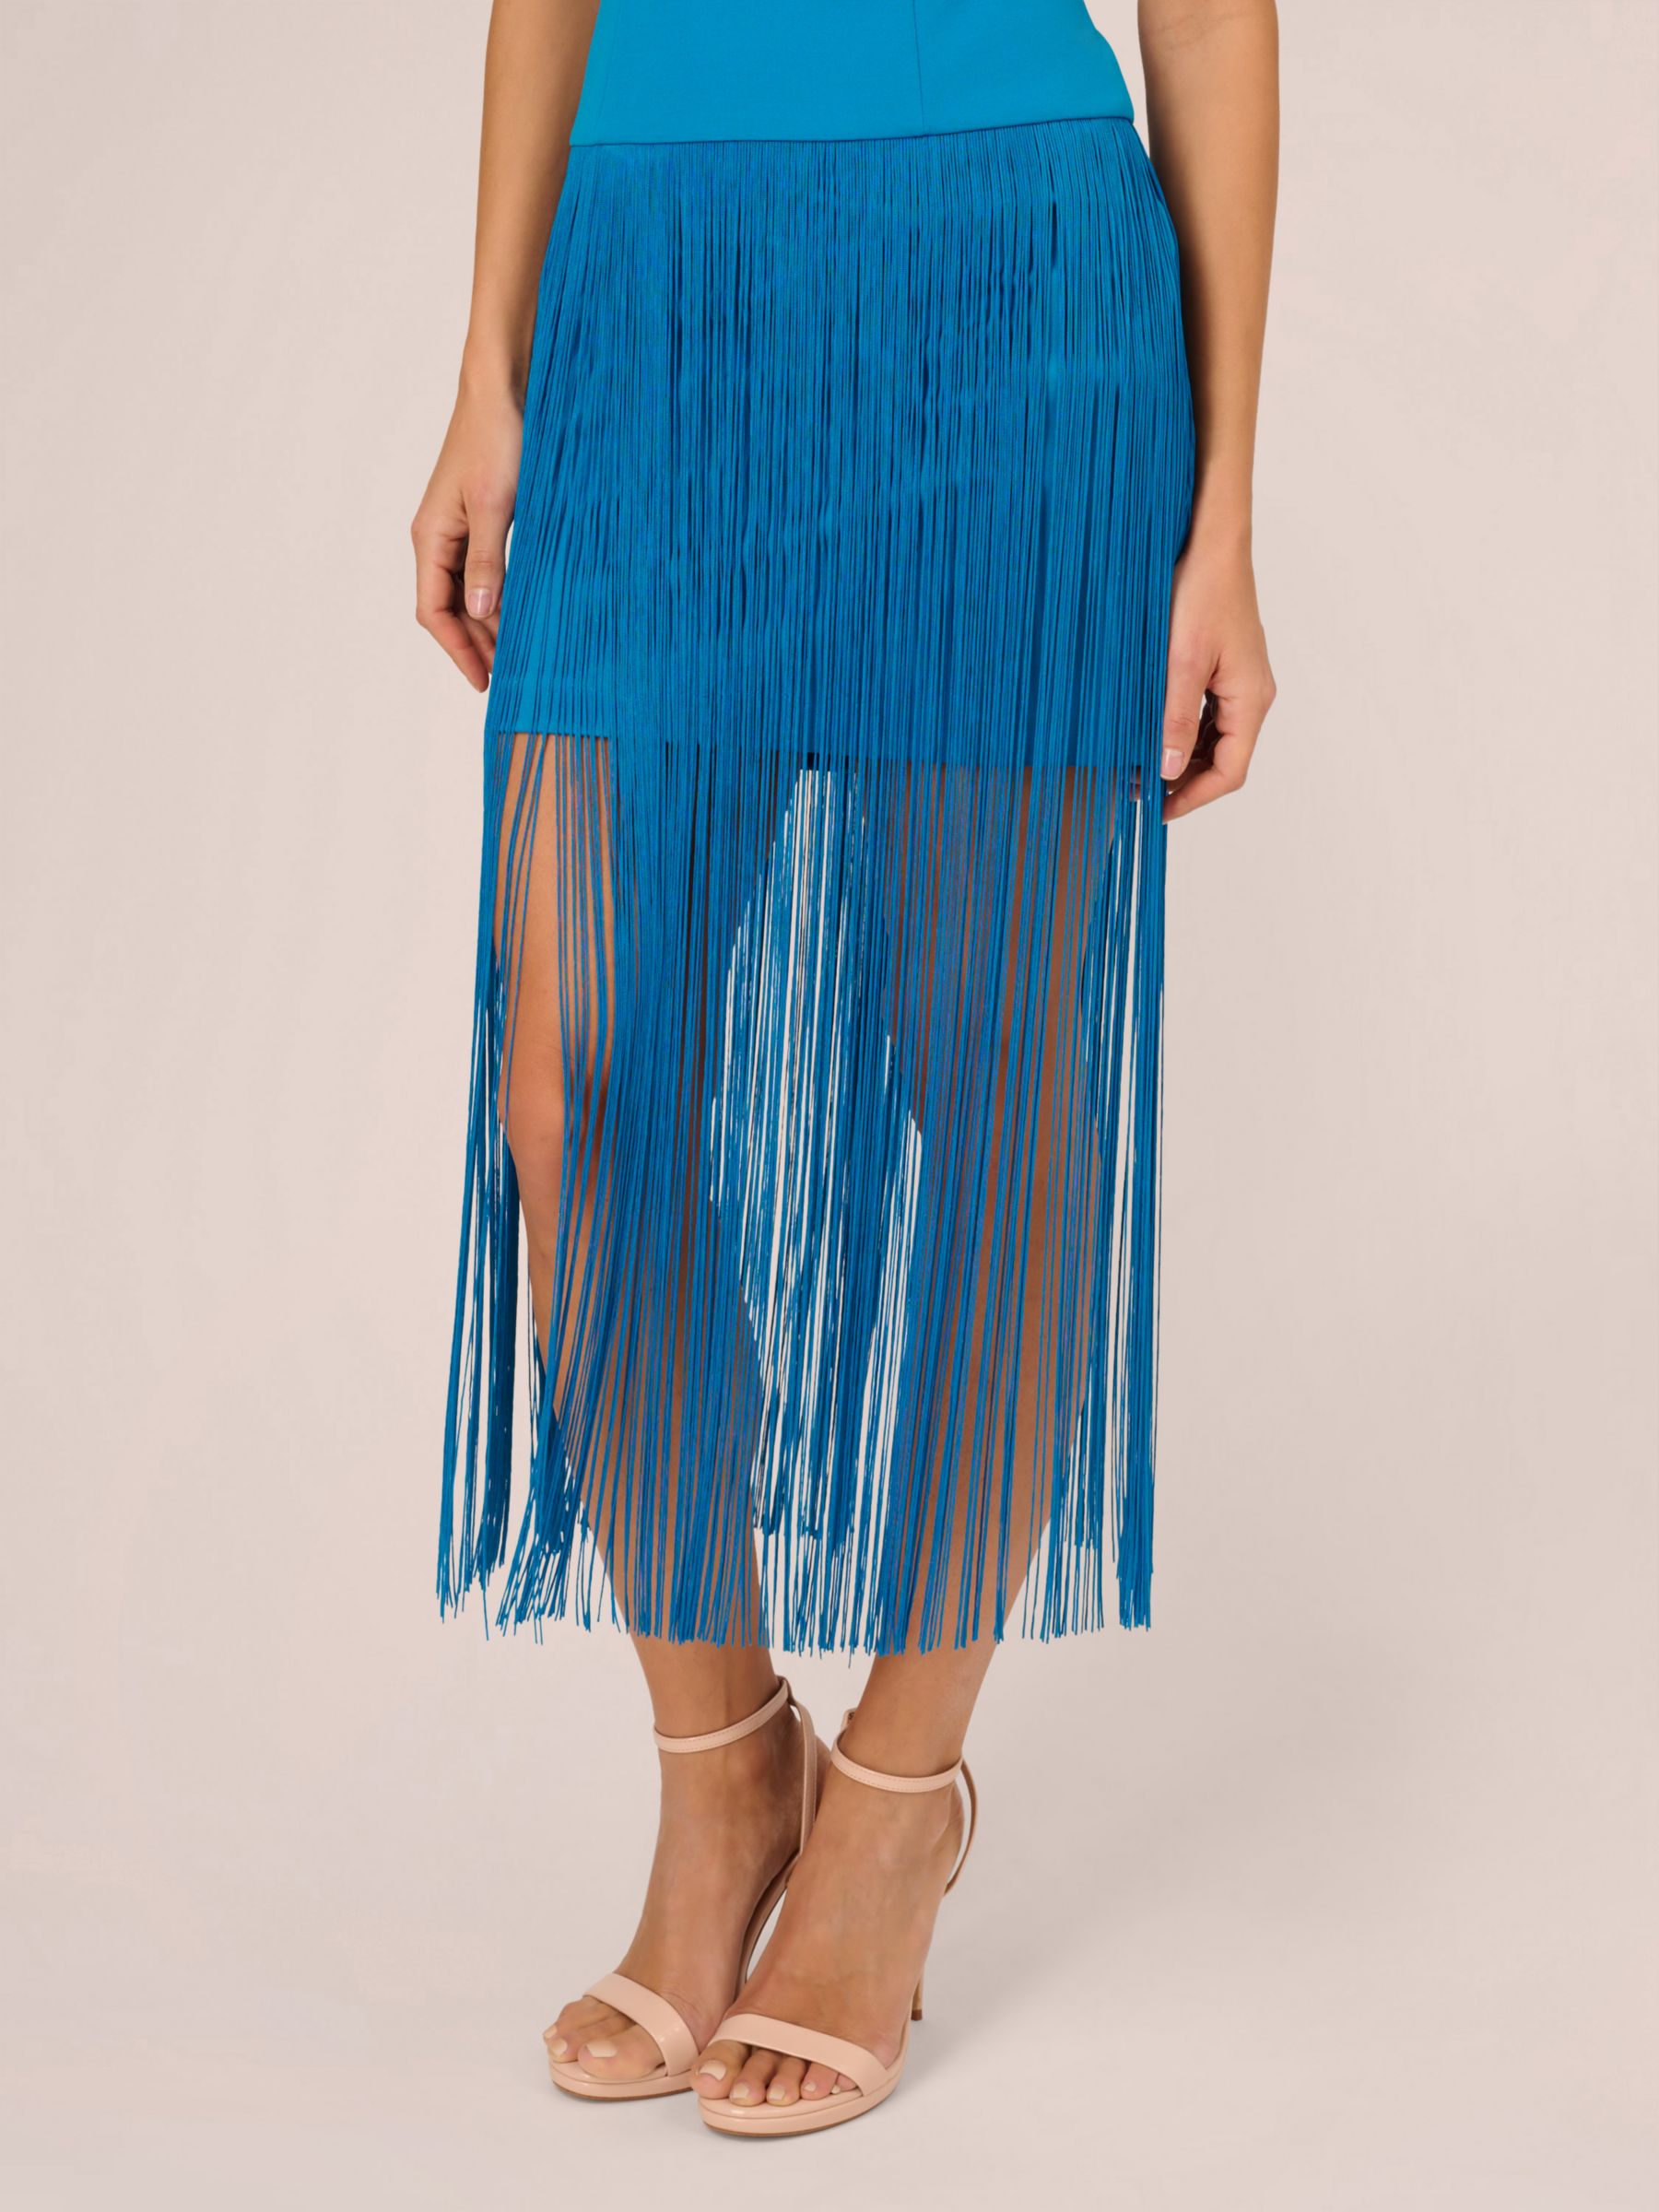 Adrianna by Adrianna Papell Knit Crepe Fringe Dress, Deep Cerulean, 8